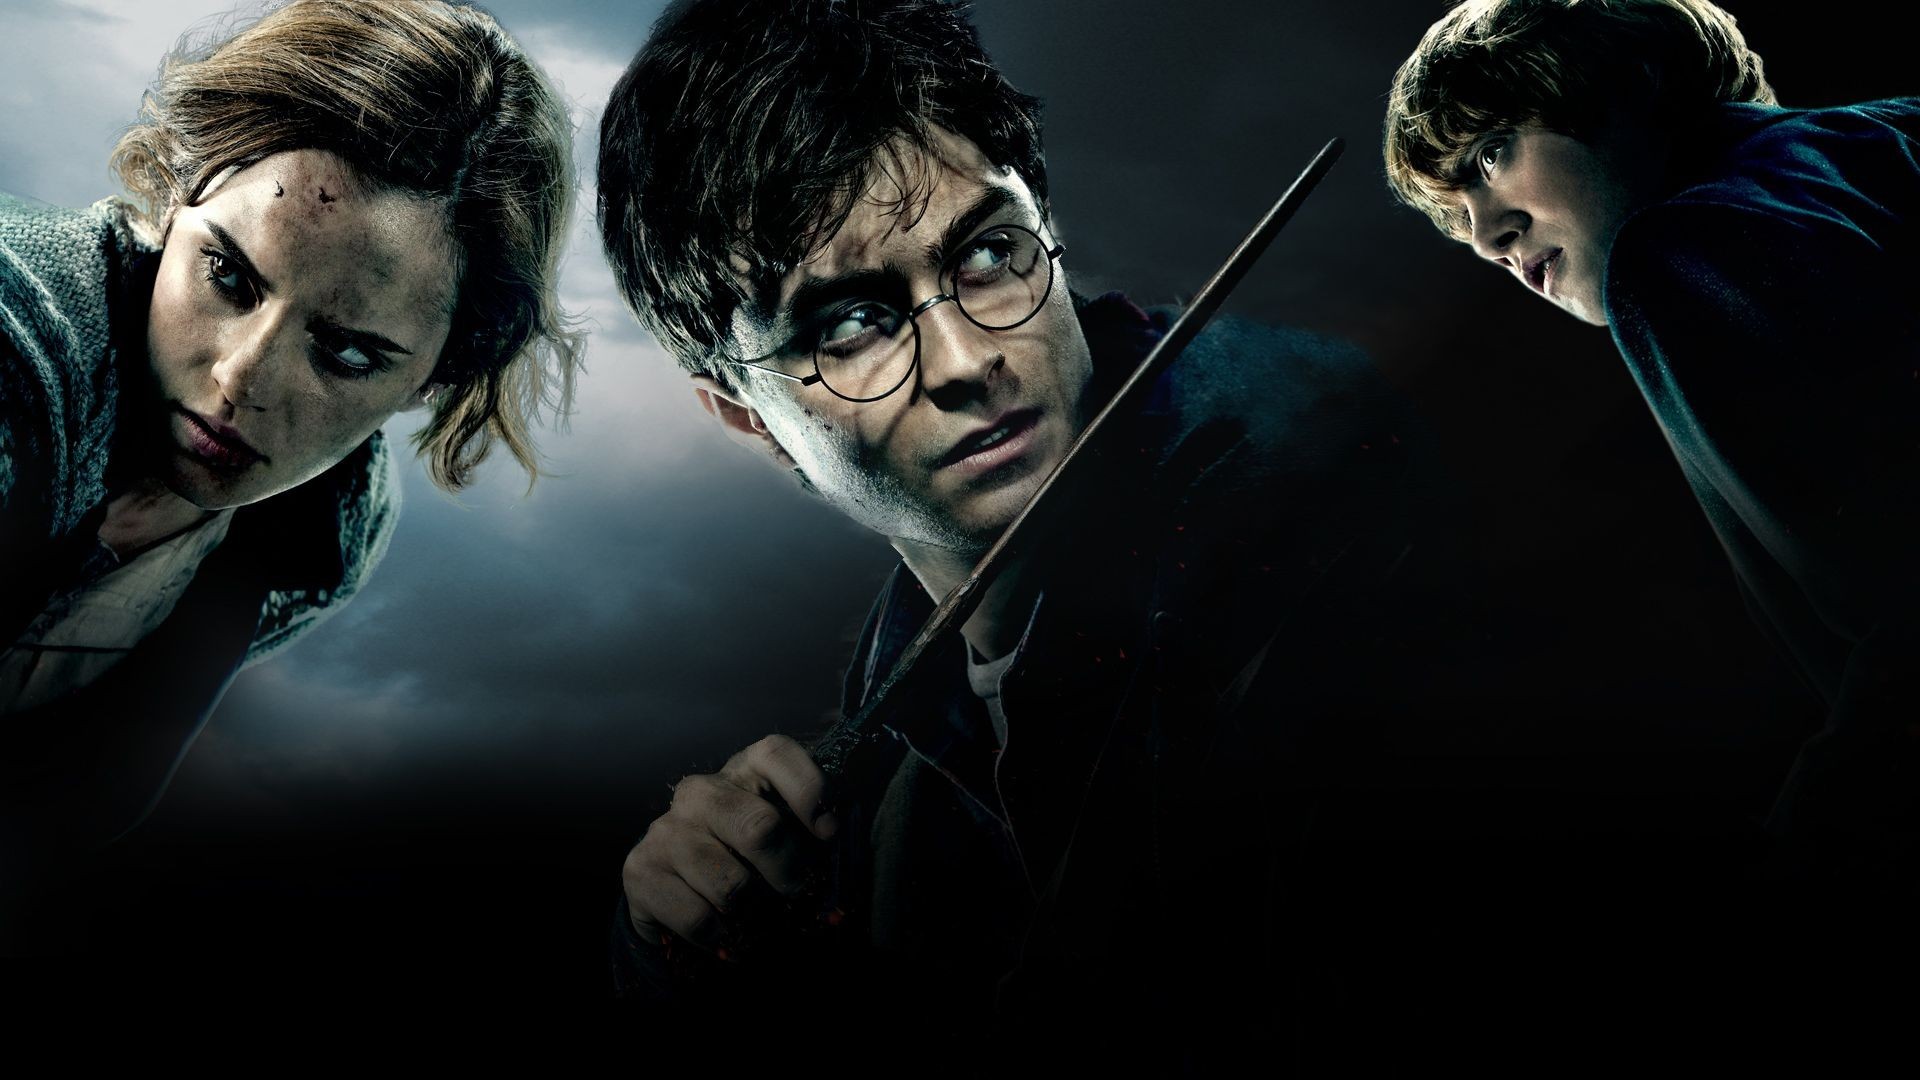 harry potter and the deathly hallows: part 1, emma watson, movie, daniel radcliffe, harry potter, hermione granger, ron weasley, rupert grint QHD